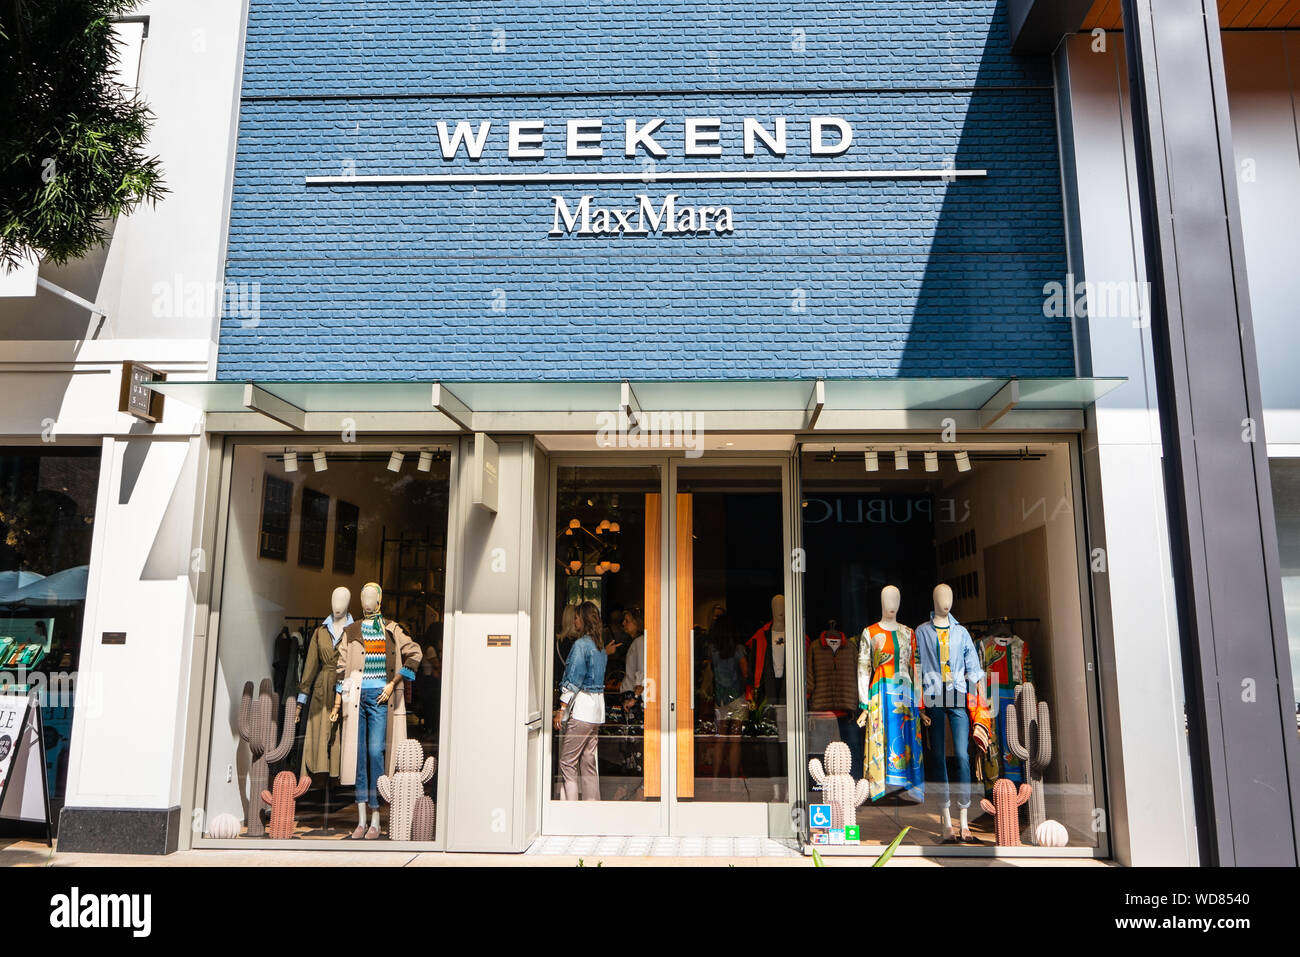 August 28, 2019 Palo Alto / CA / USA - Weekend MaxMara store located in Stanford Shopping Mall in San Francisco bay area Stock Photo